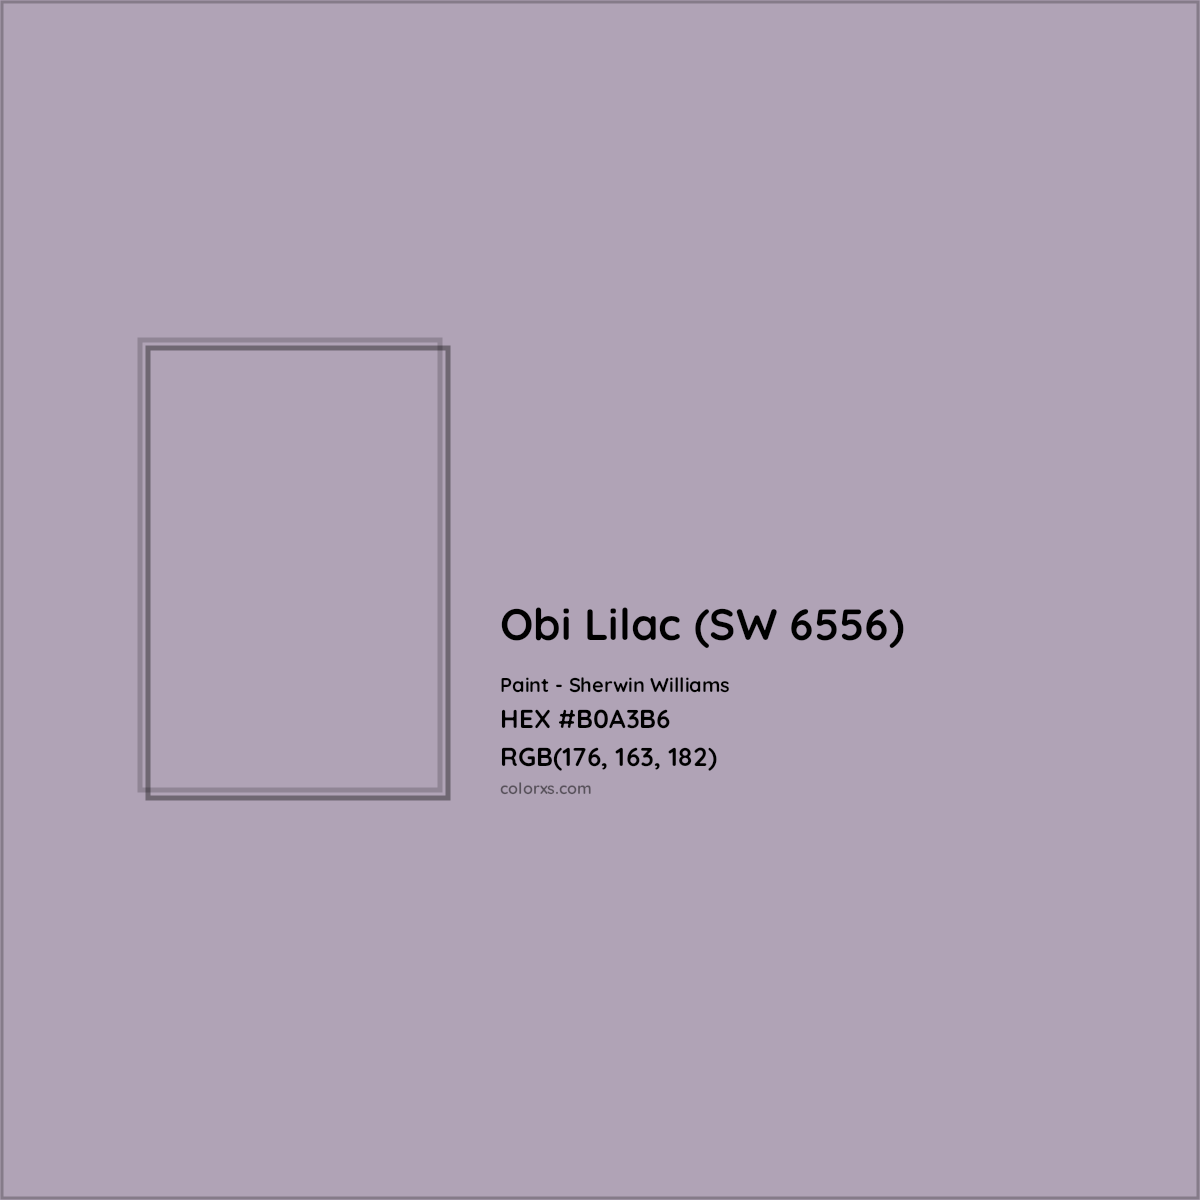 HEX #B0A3B6 Obi Lilac (SW 6556) Paint Sherwin Williams - Color Code